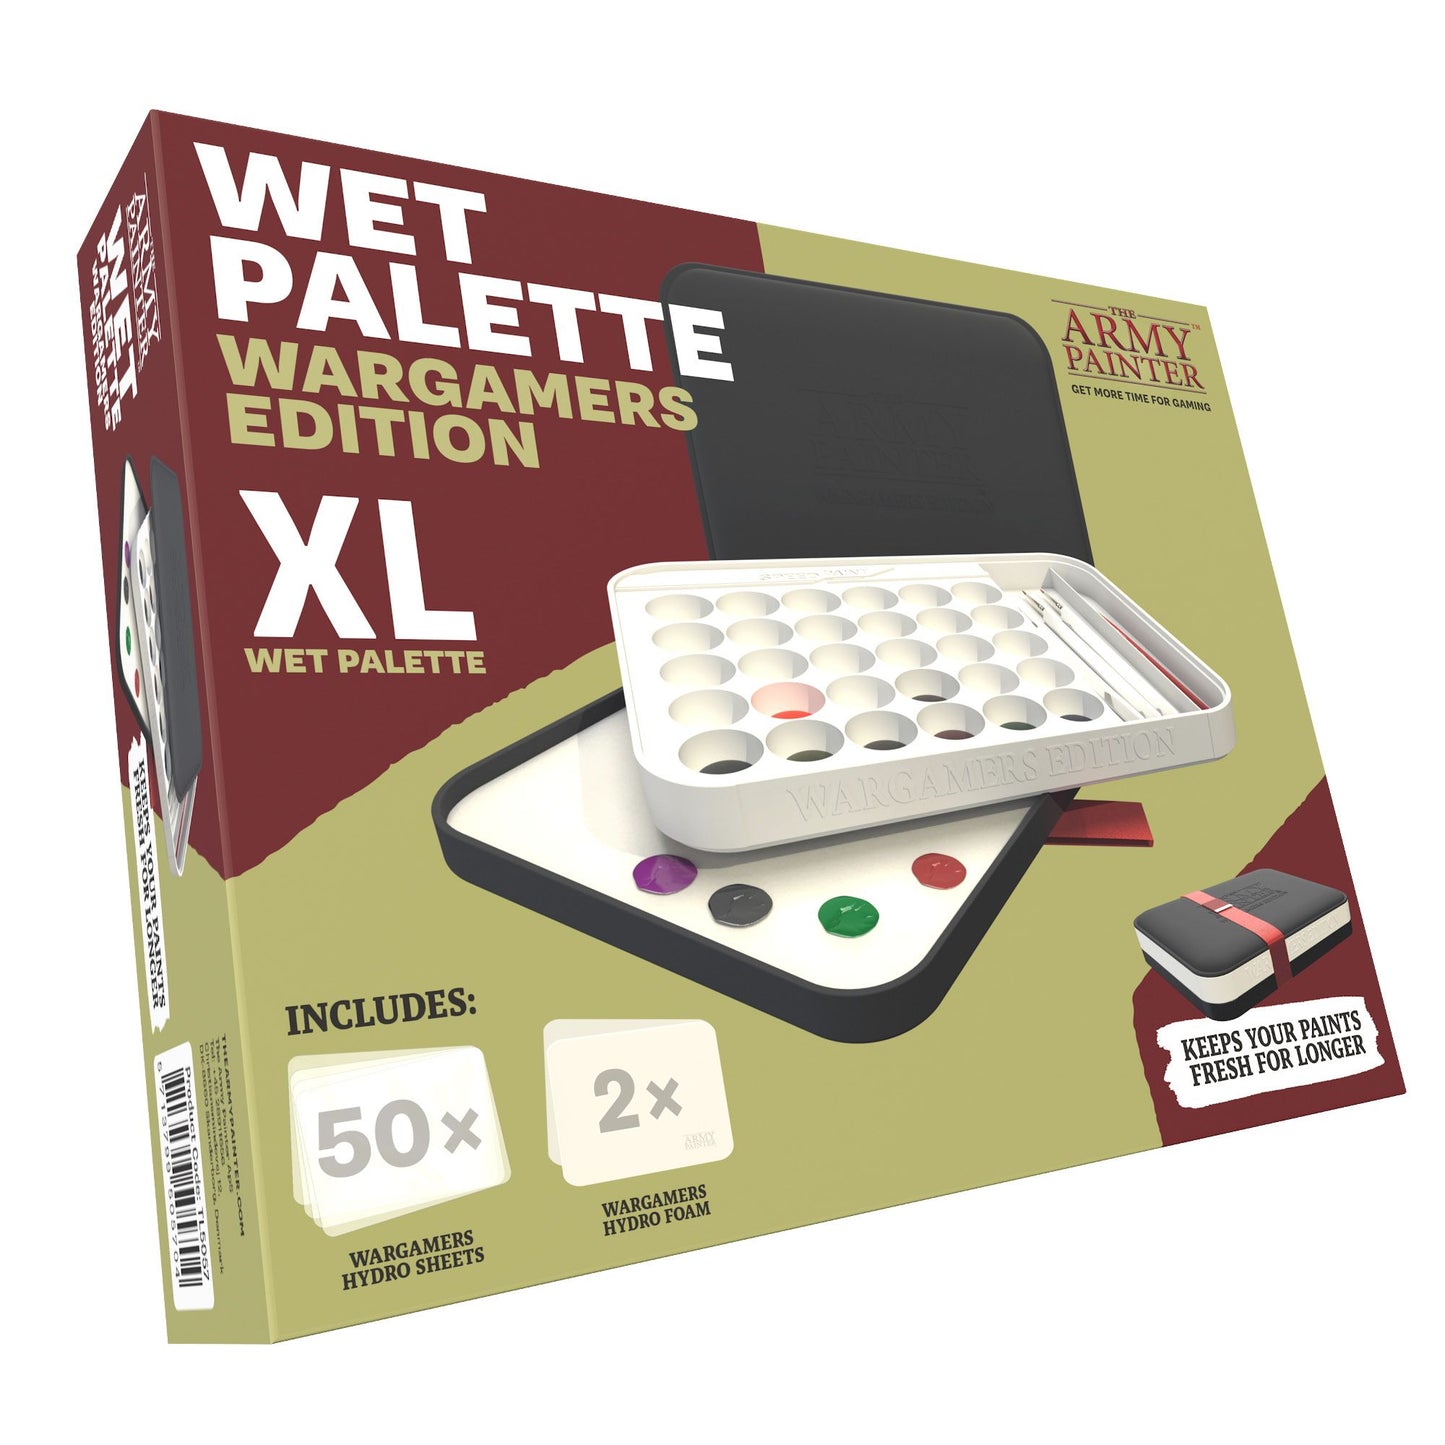 Army Painter Tools - Wet Pallette - Wargamer Edition